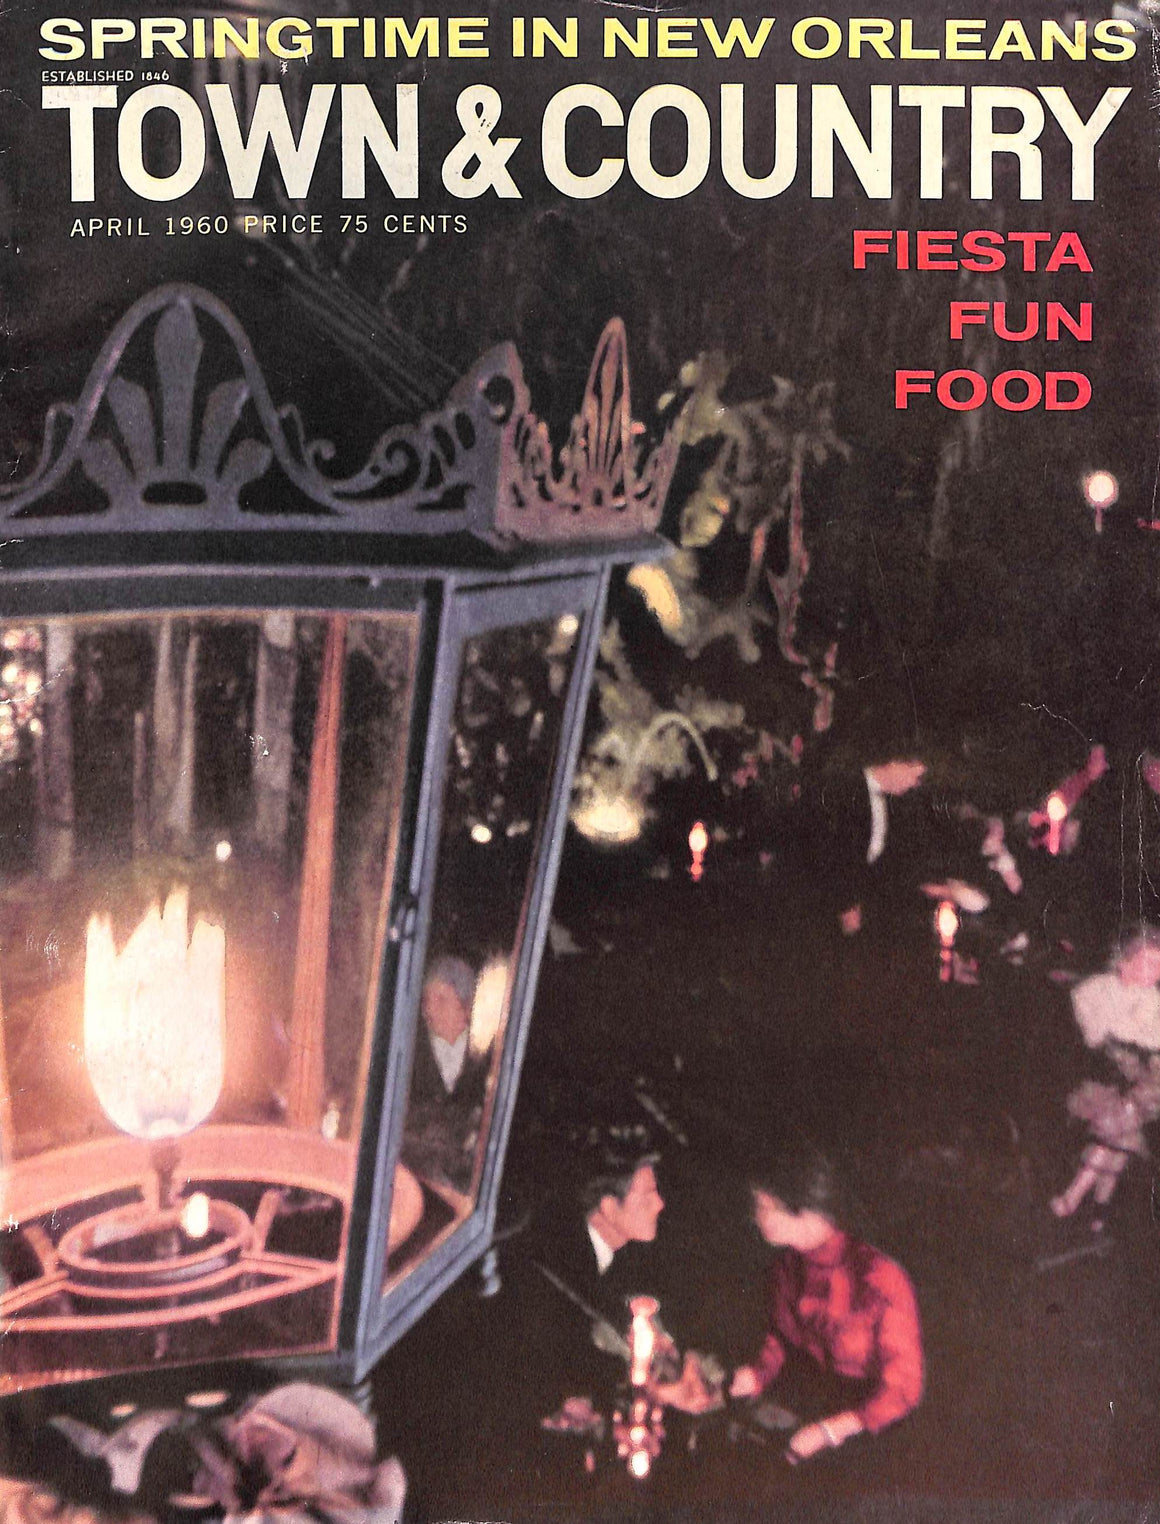 Town & Country April 1960 Springtime In New Orleans